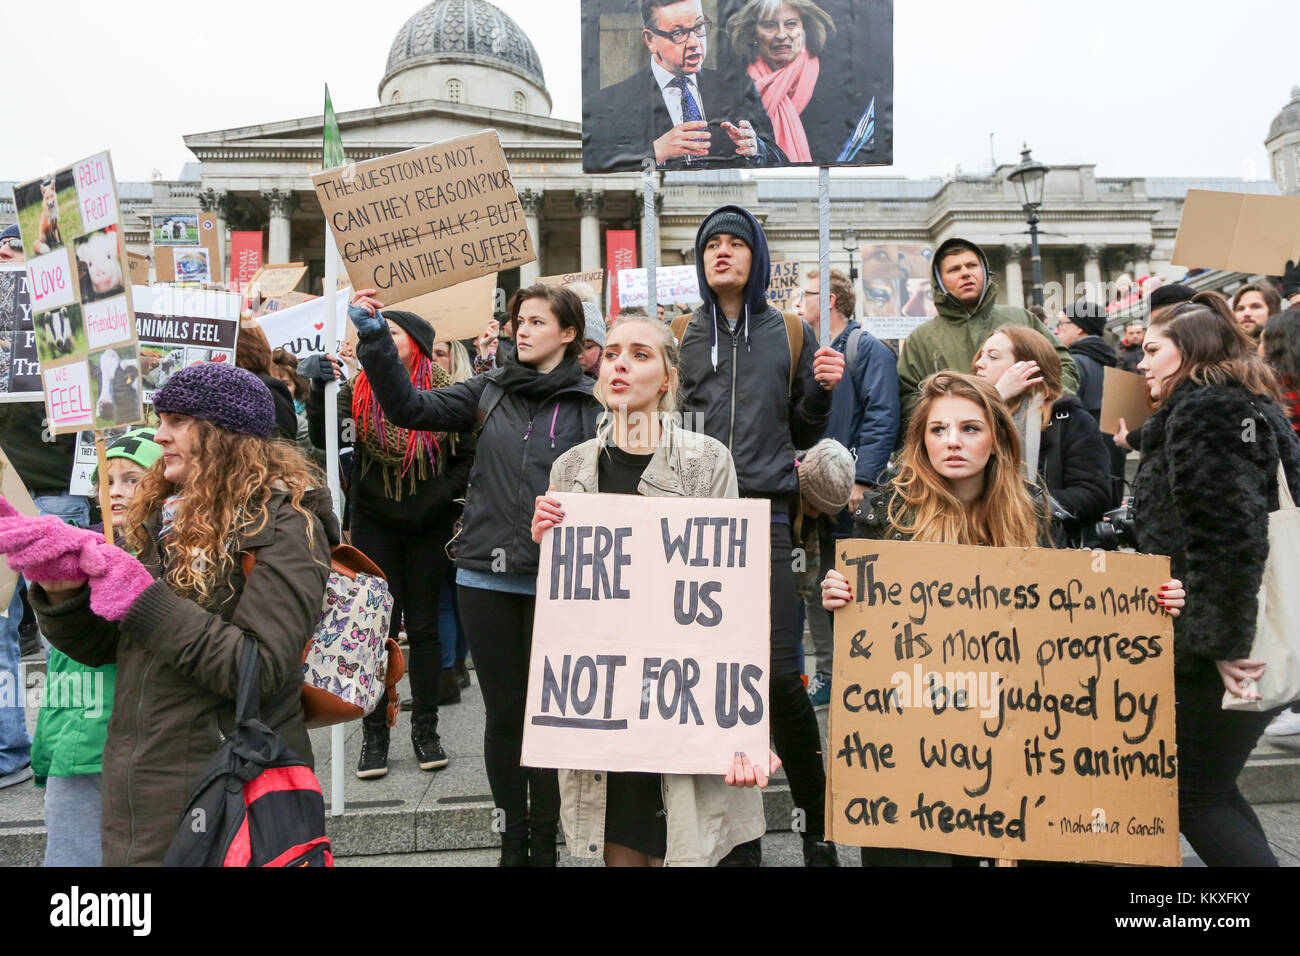 London, UK. 2nd Dec, 2017. Demonstration against parliament and the MPs who have voted to reject the inclusion of animal sentience into the EU Withdrawal Bill. Credit: Penelope Barritt/Alamy Live News Stock Photo